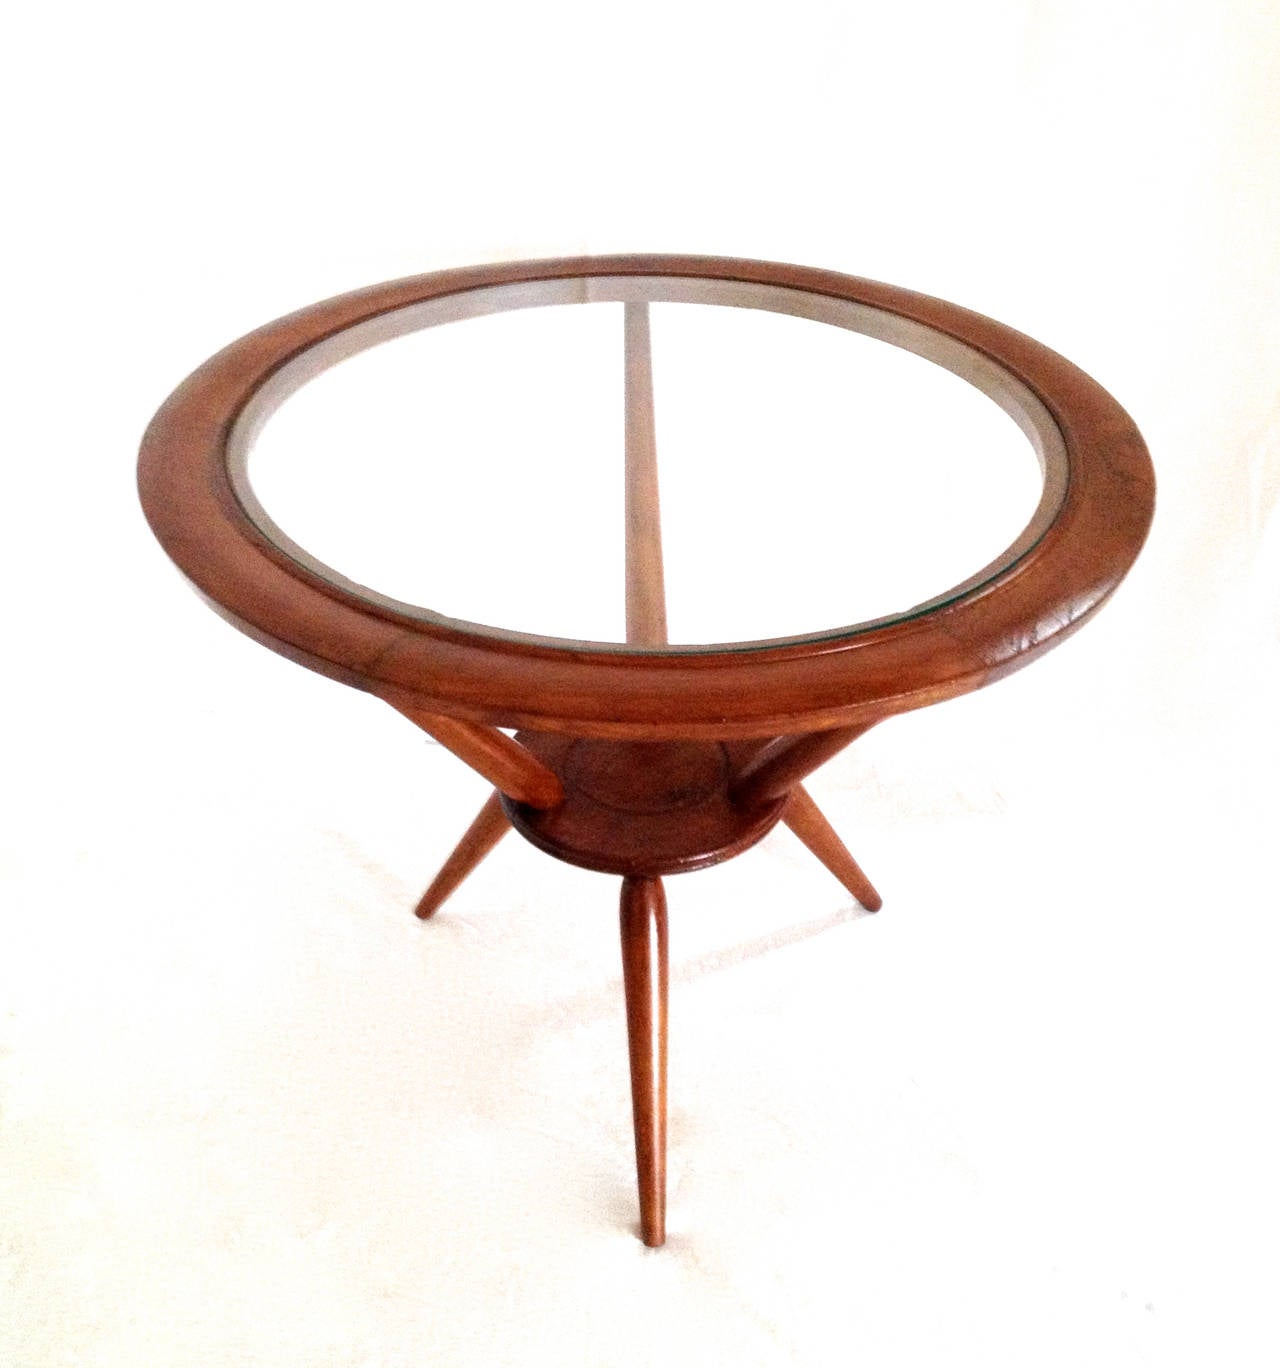 Beautiful Mid-Century coffee table in rosewood with glass top fitted inside the rim. Its three legs that stand in opposite directions lend the table a very modernist and transparent appearance.
Very articulate Italian design with a Classic feel.